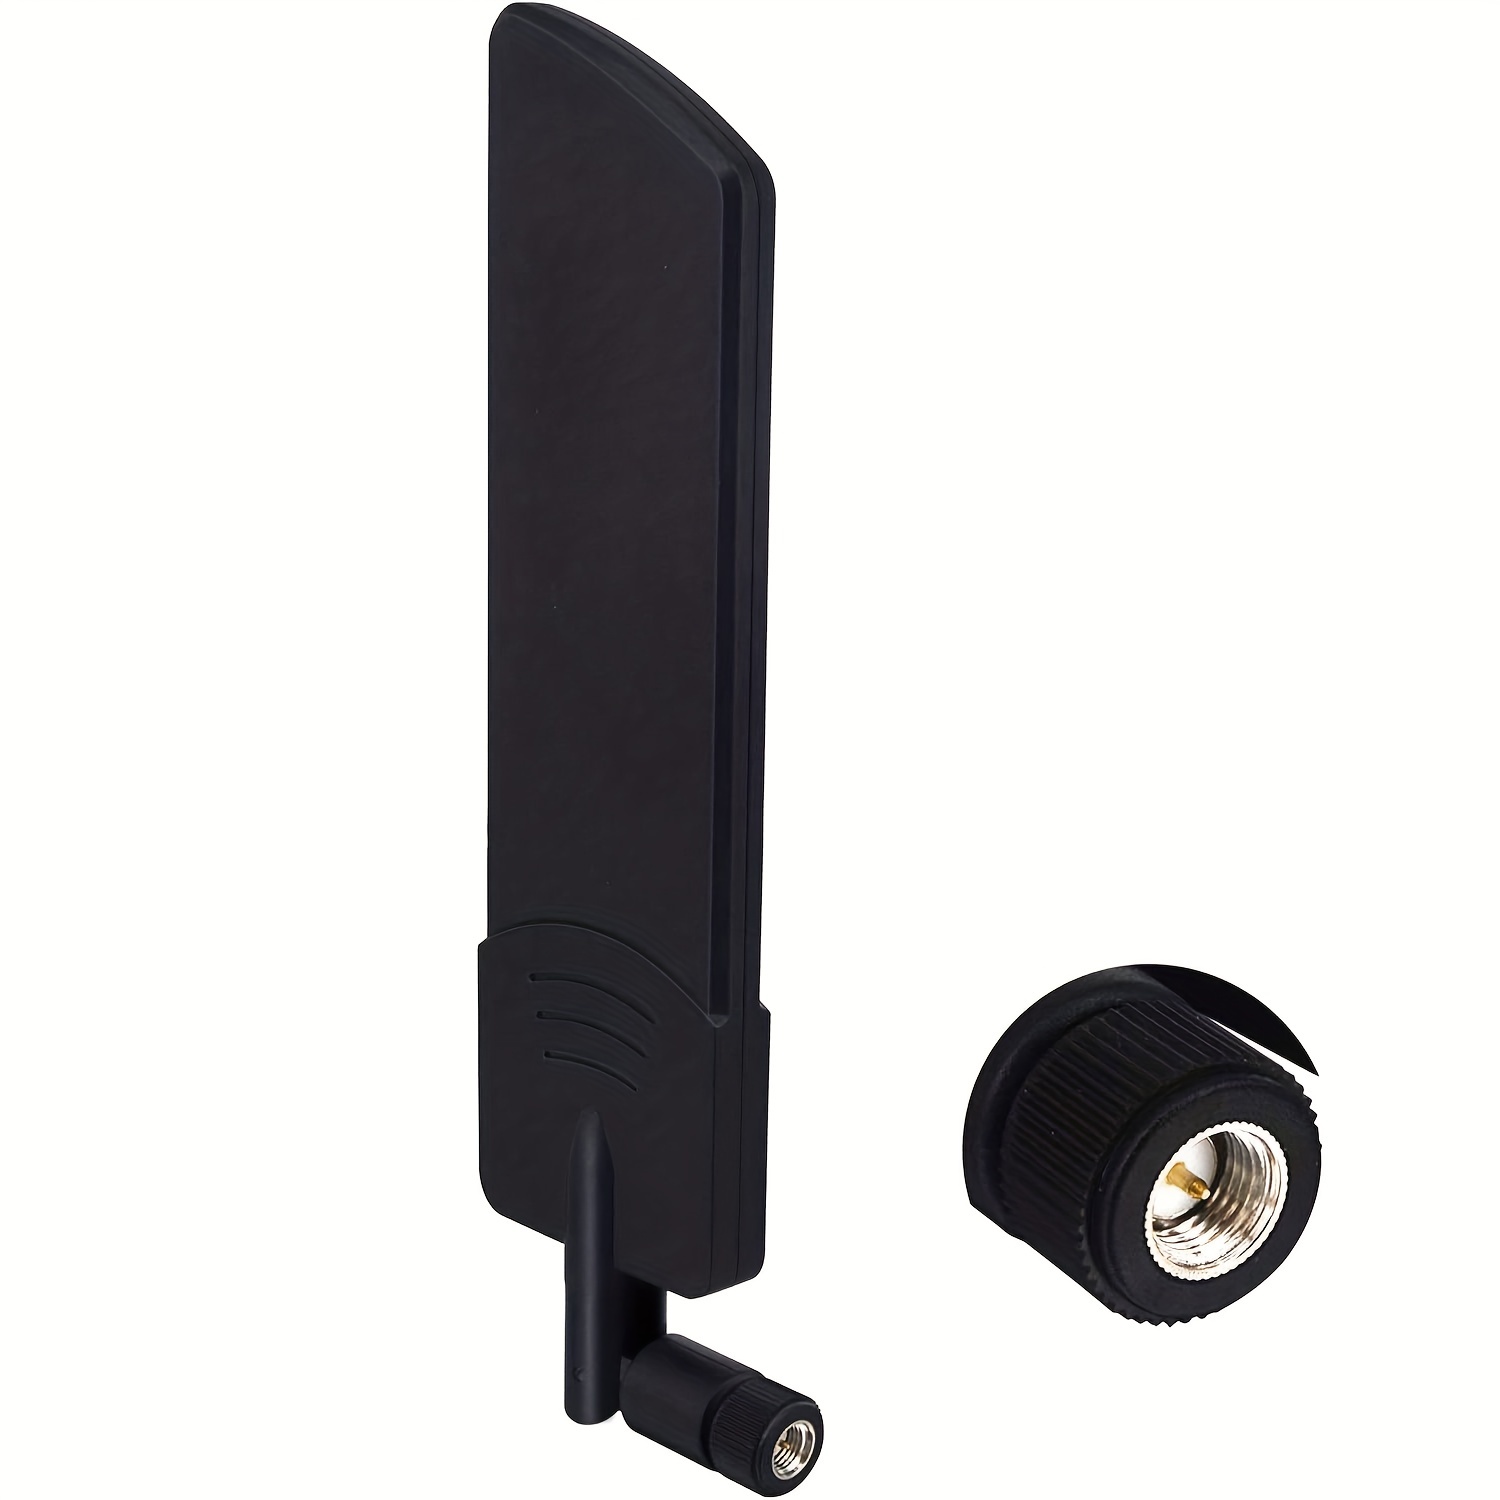 cellular home phone adapter